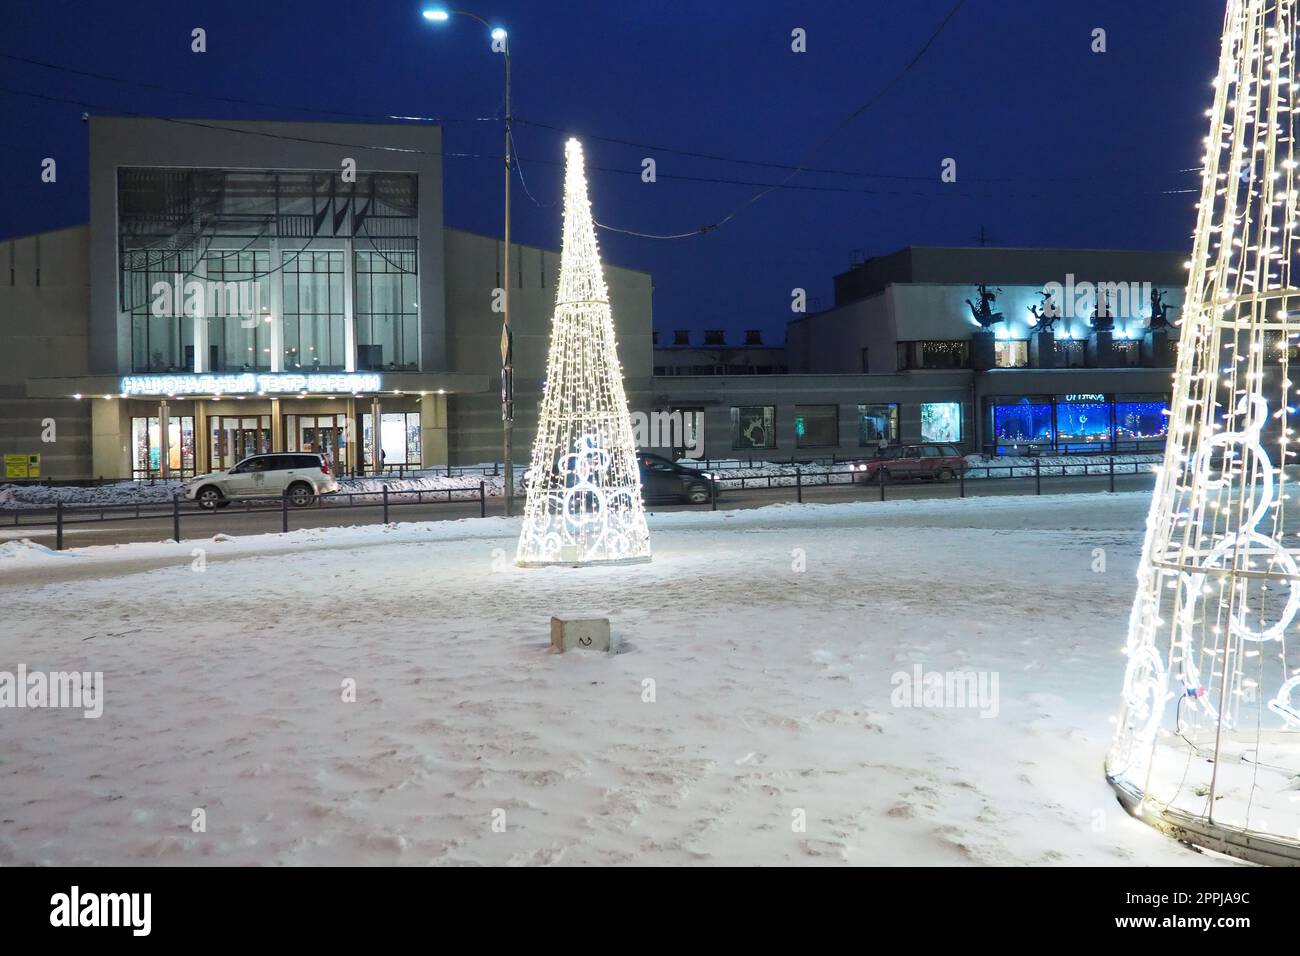 Petrozavodsk, Karelia, Russia, January 5, 2023. New Year's city fuss. Garlands - Christmas trees and lighting fixtures. Cars and people go through the snow. Karl Marx Avenue. National Finnish Theatre Stock Photo